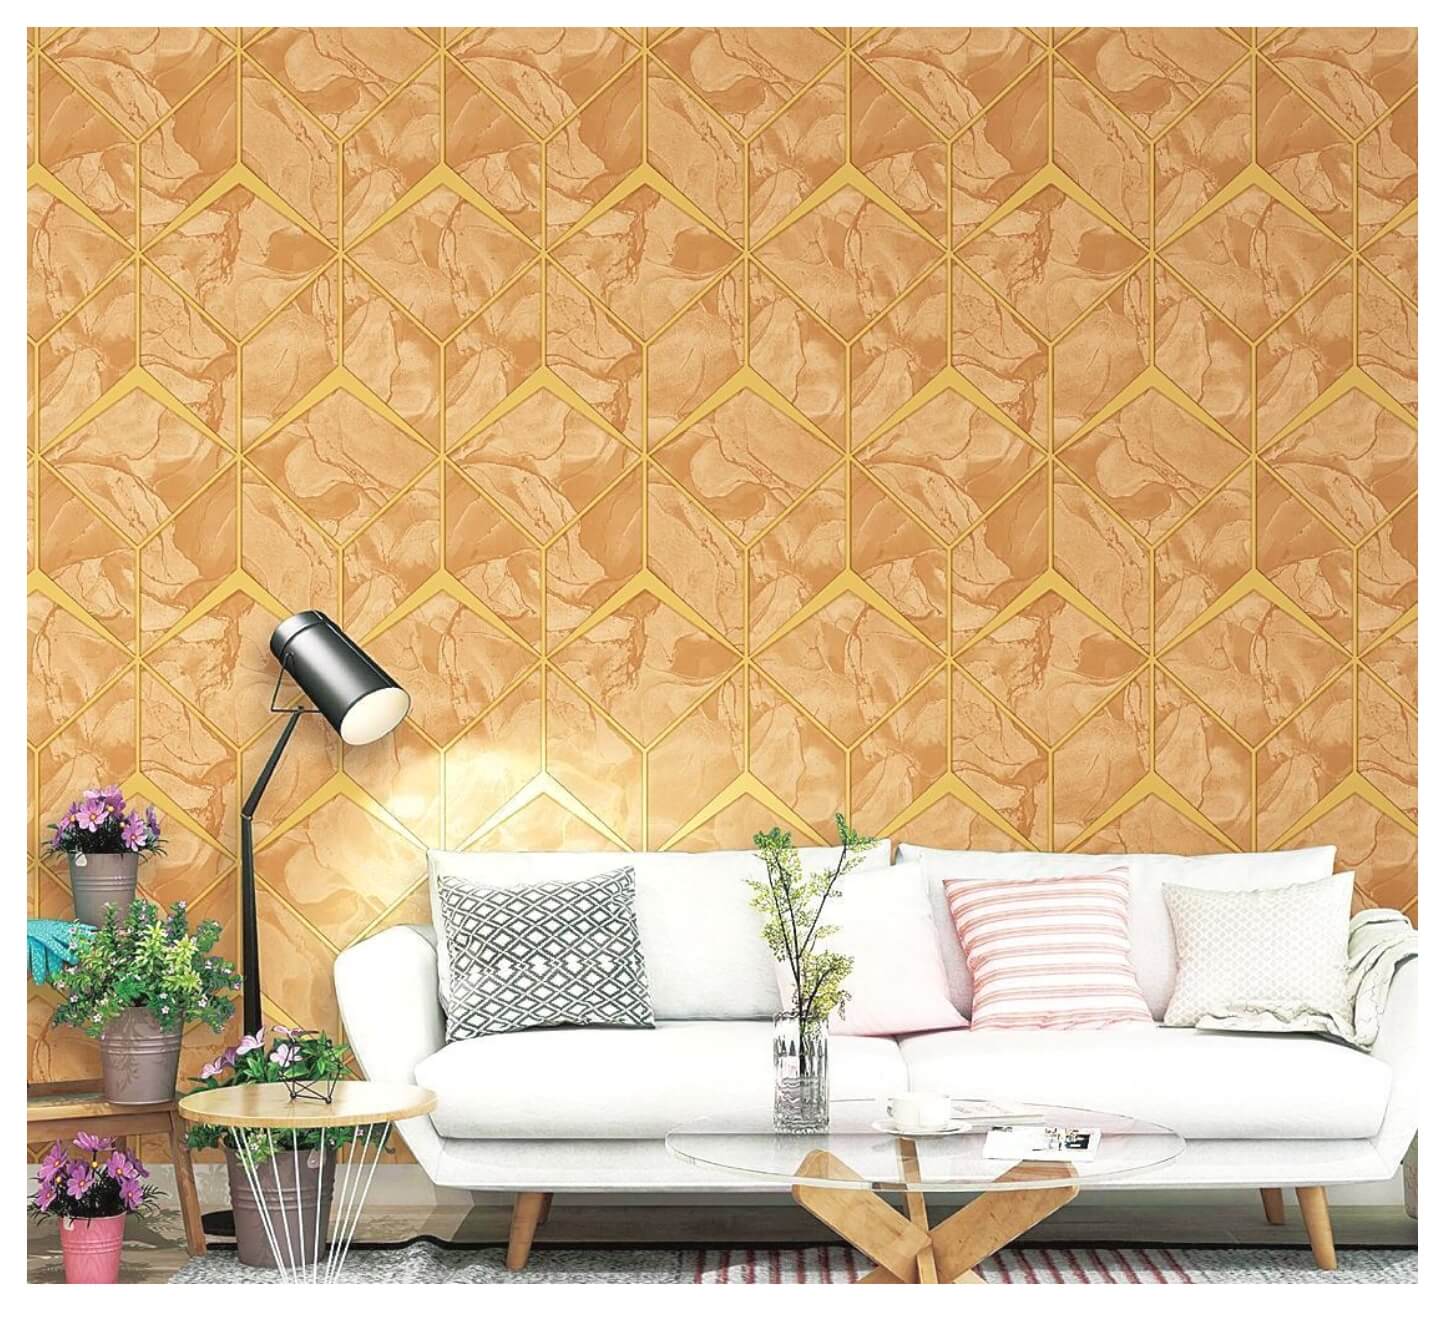 Beautiful Color 3D Design Wallpaper Better choice For Living Area, Bedroom, kids room, Office Durable PVC Wallpapers (14)